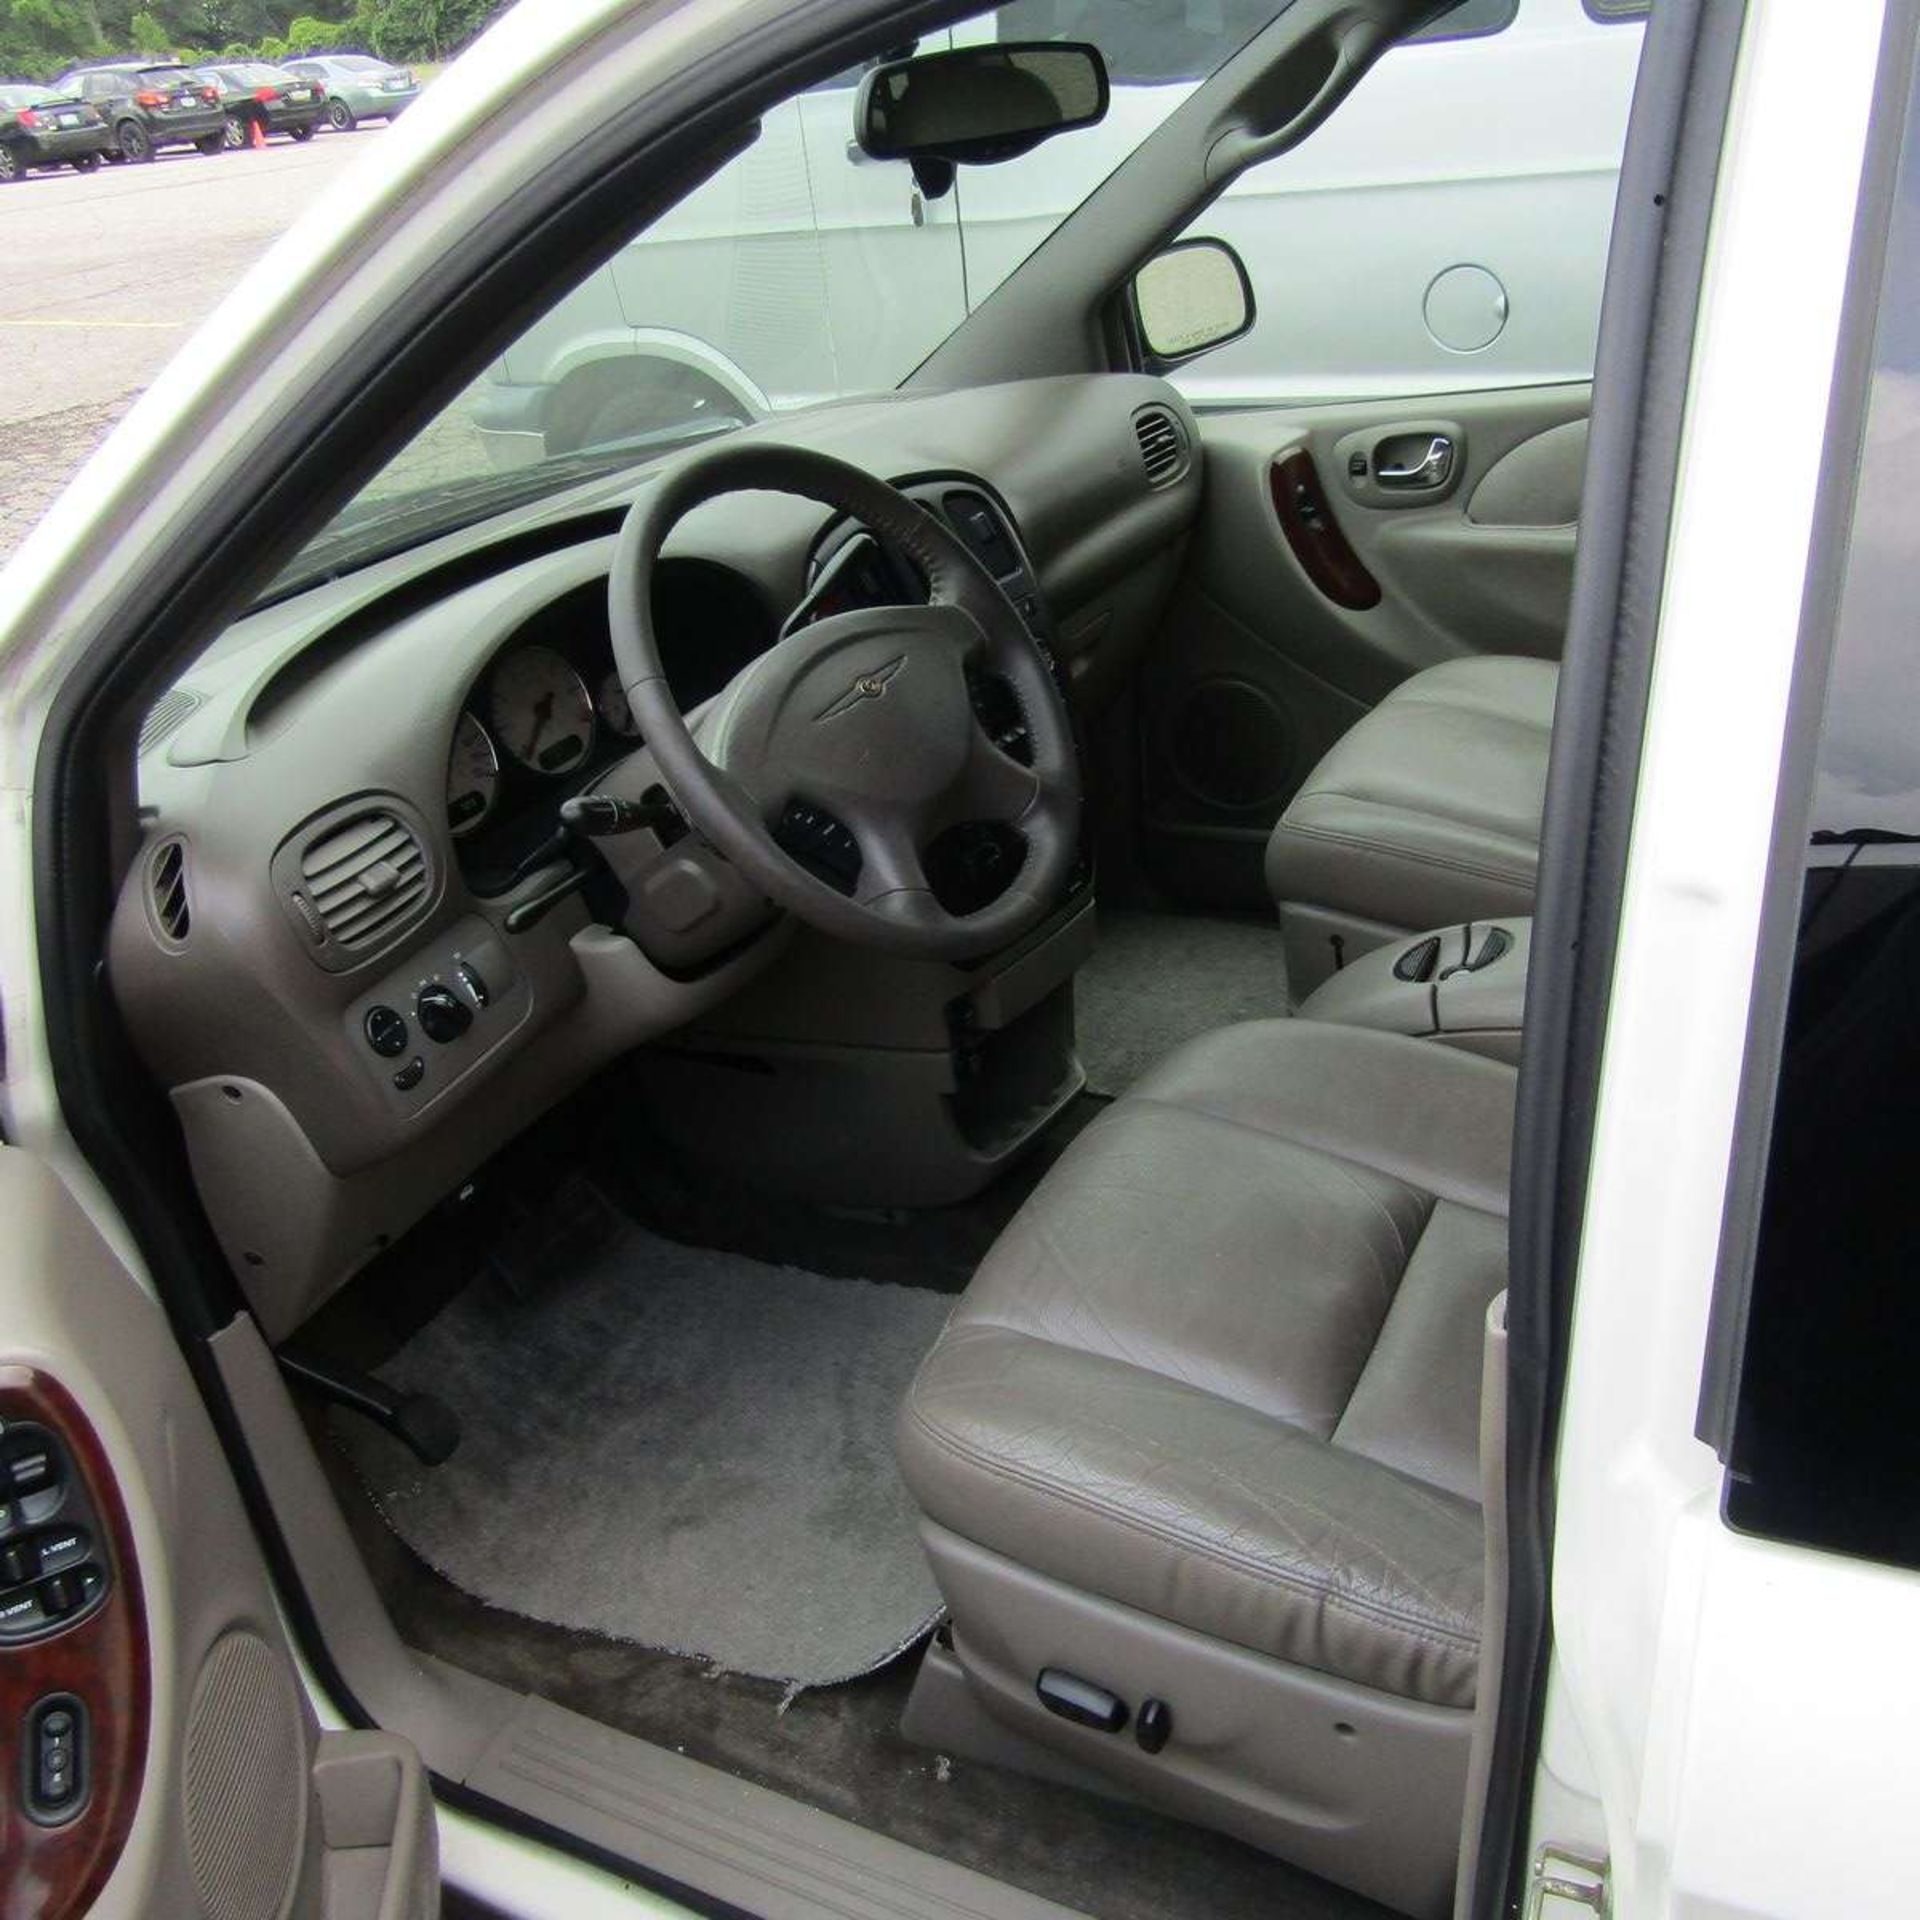 2003 Chrysler Town and Country Mini Van - Image 5 of 7